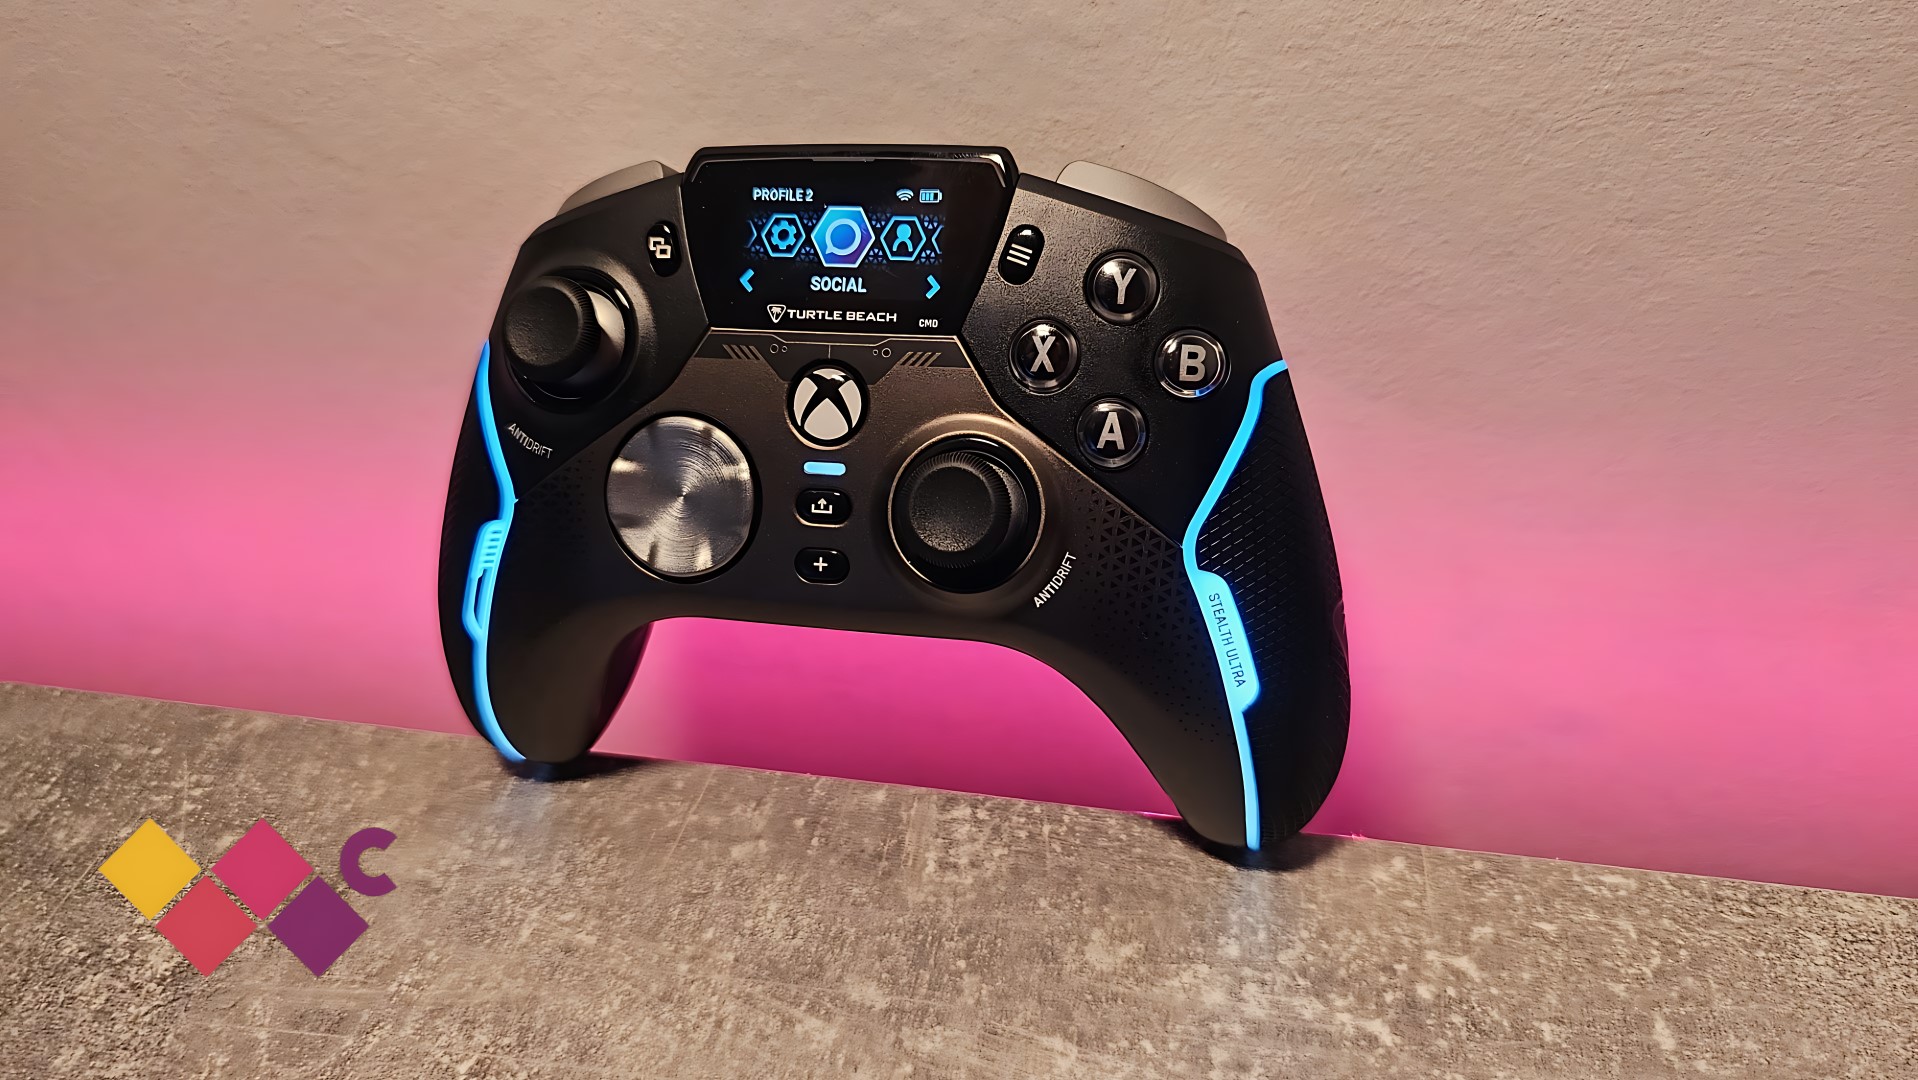 Could the 'Turtle Beach Stealth Ultra' be the best Xbox wireless